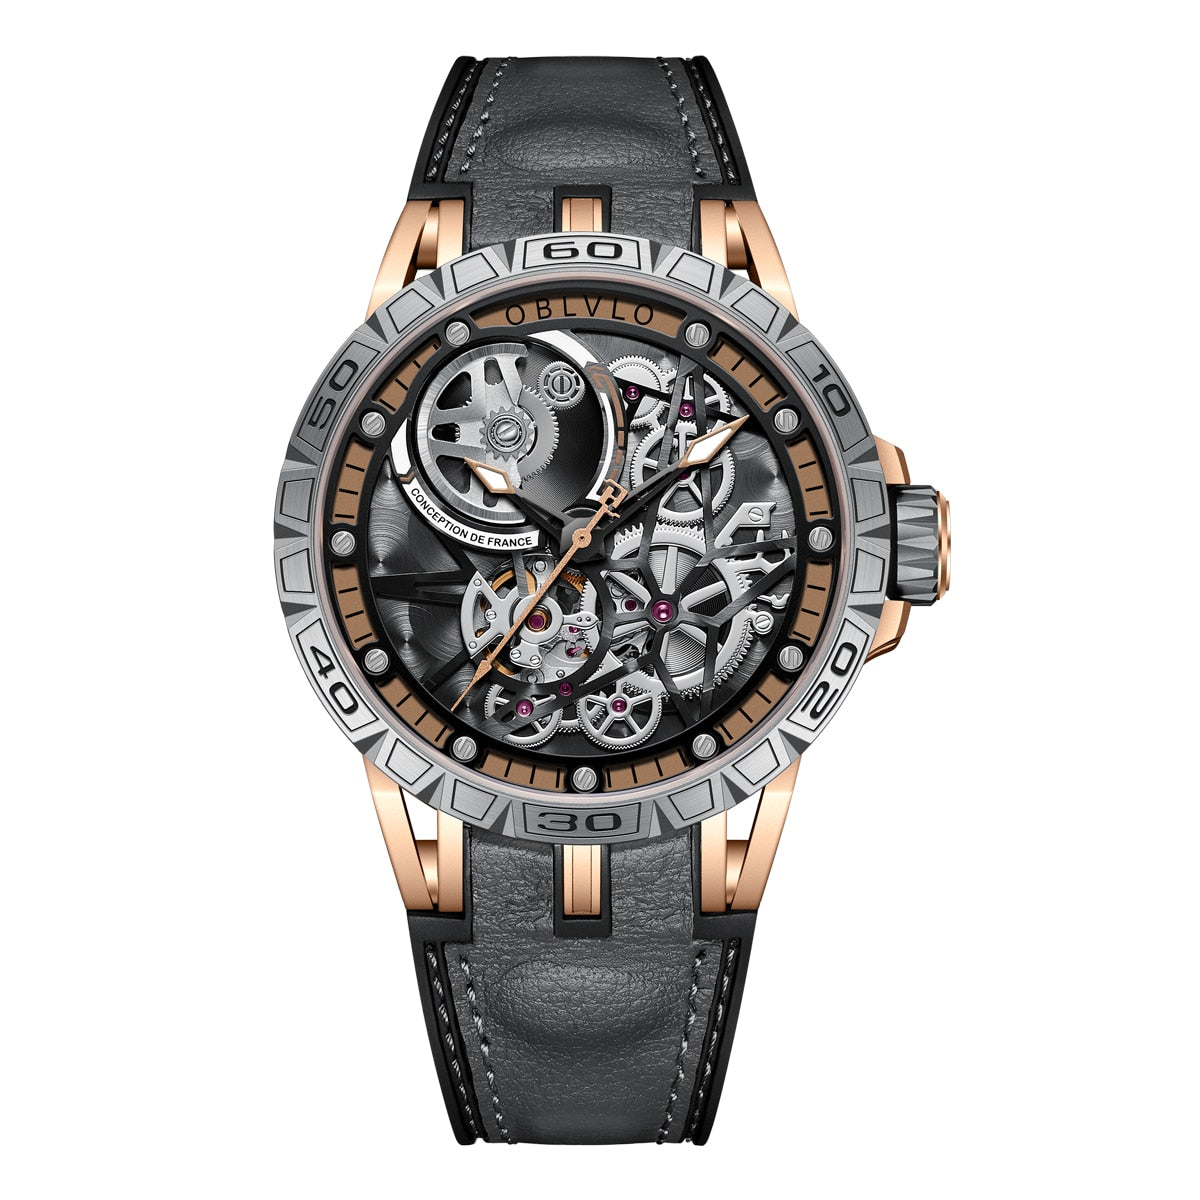 Silver/Rose Oblvlo LM Skeleton Sport, Automatic Self-Wind Mechanical Watch from fiveto.co.uk